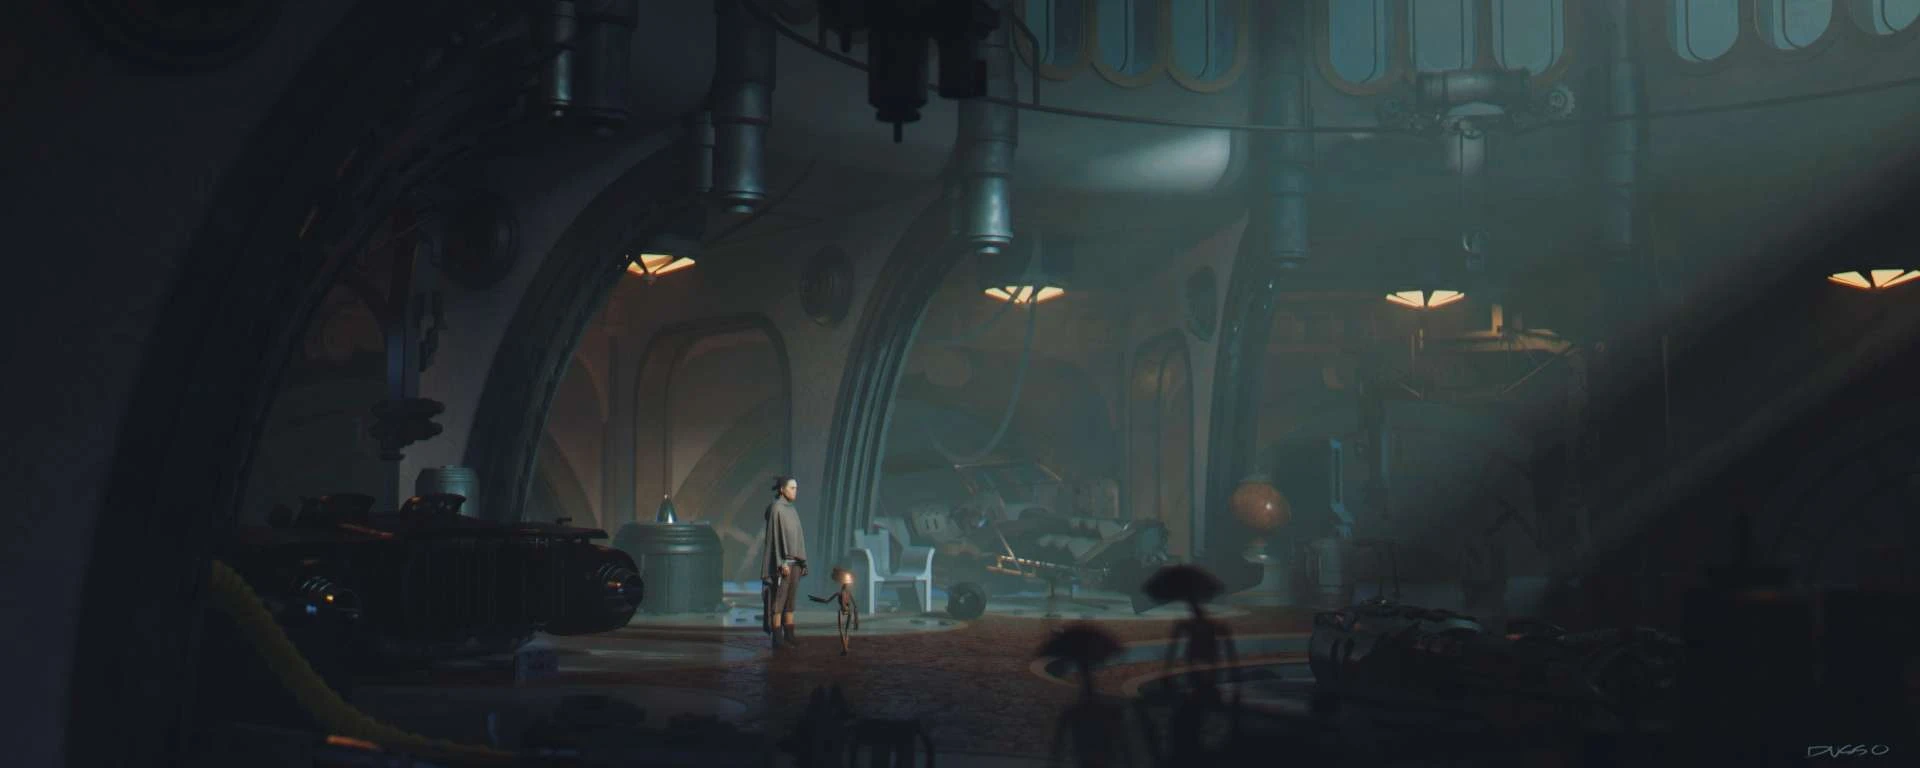 Star Wars scene with Rey, concept art from Dusso